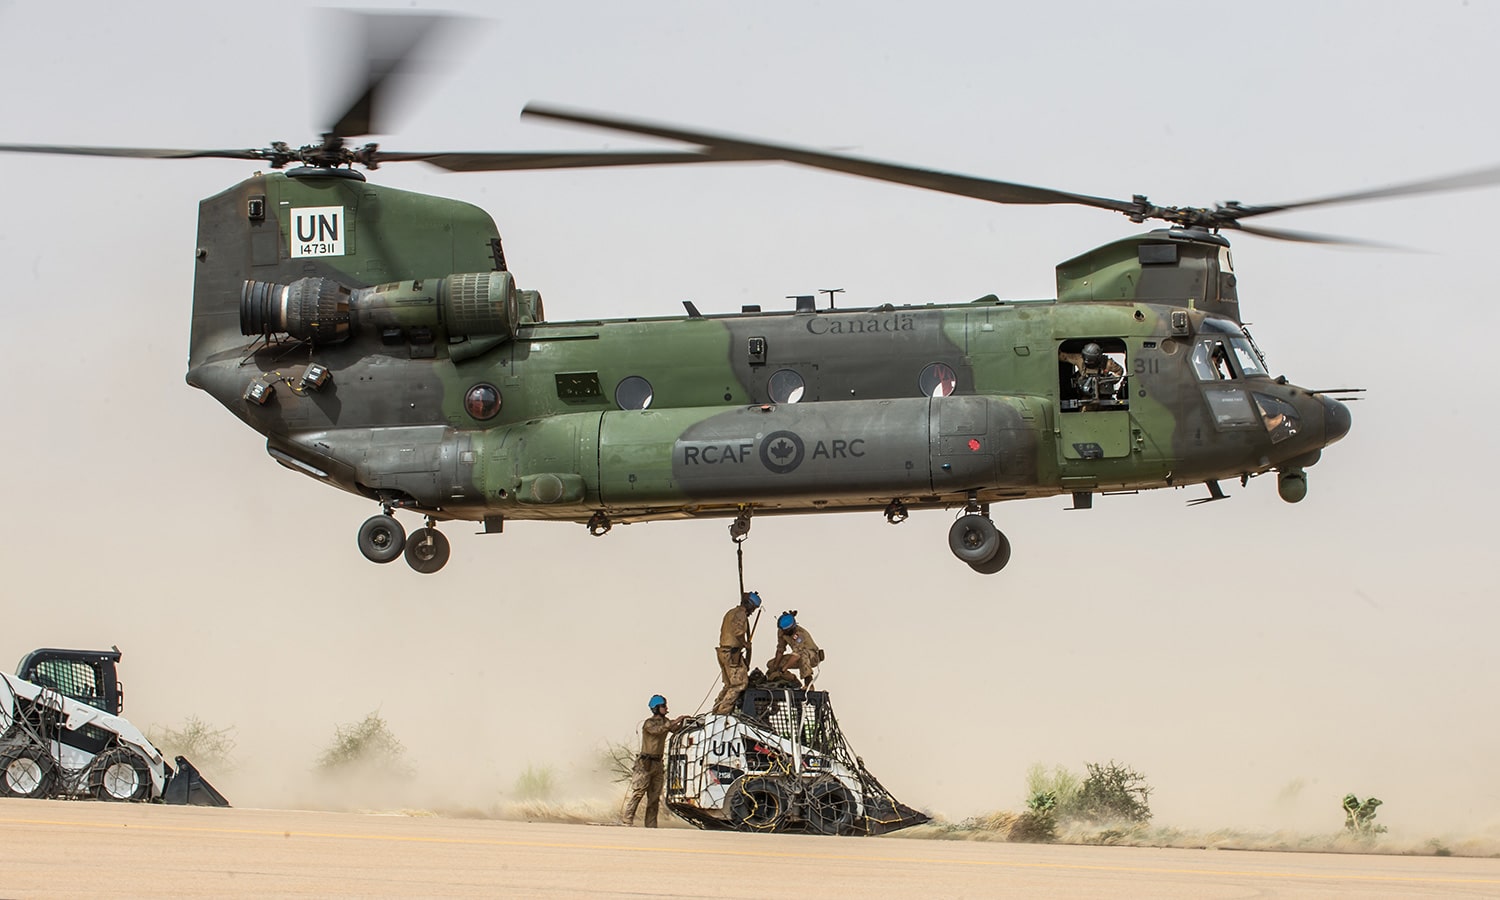 UN assistance helicopter